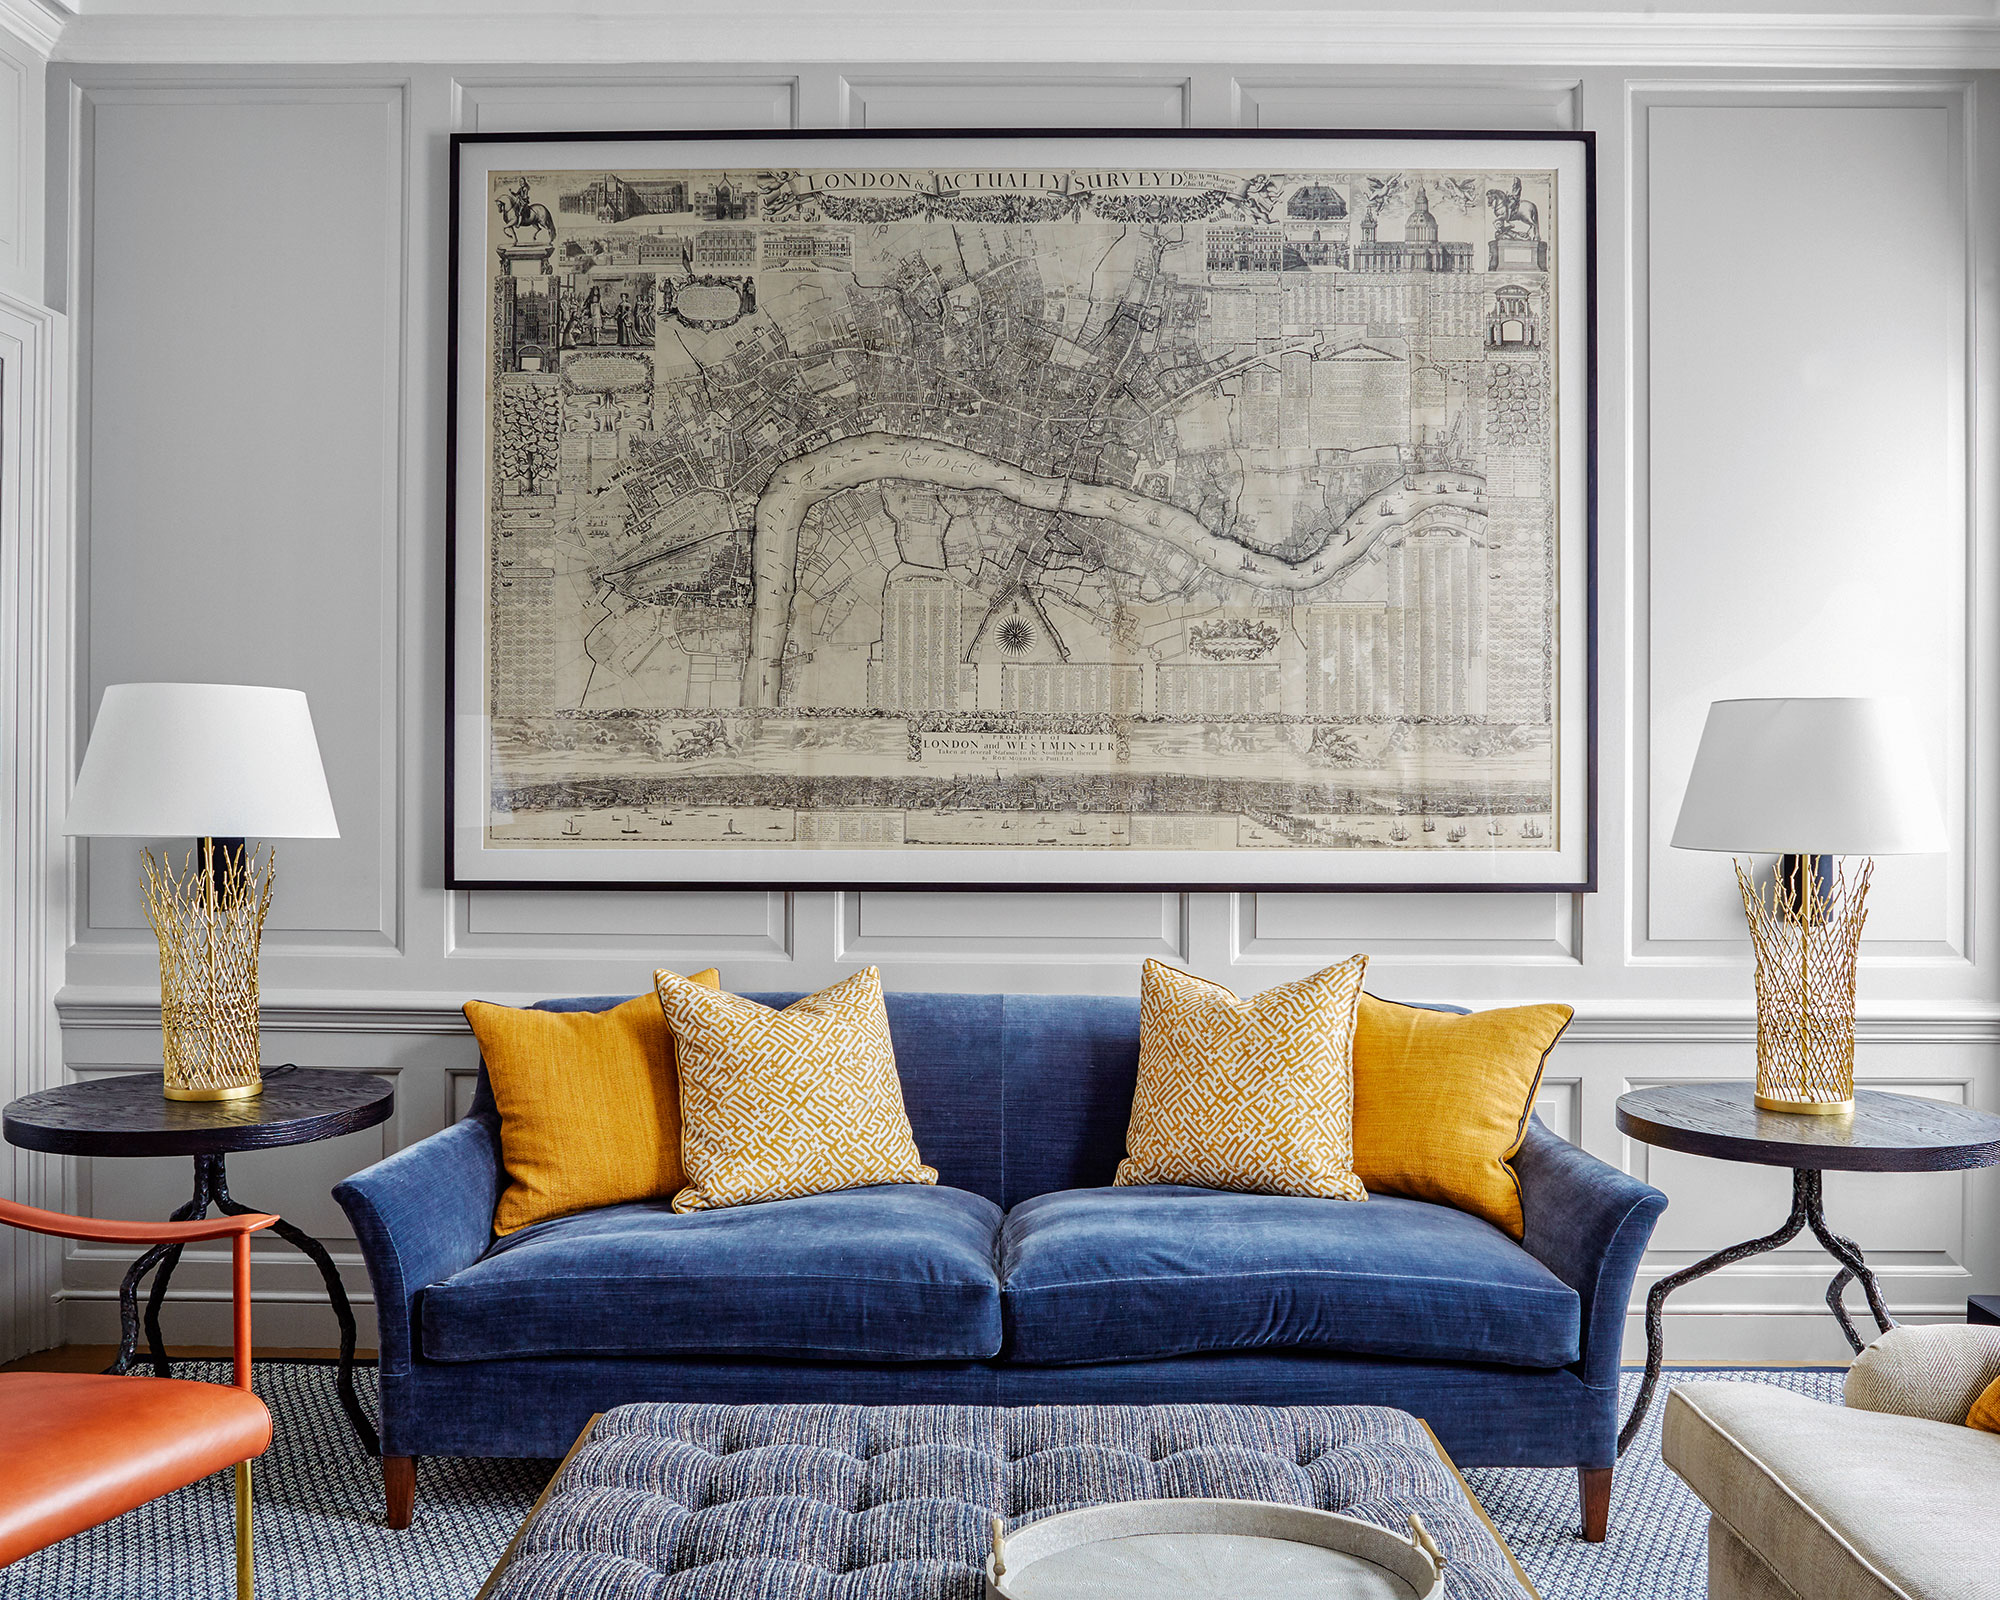 Living room with blue sofa and wall panelling